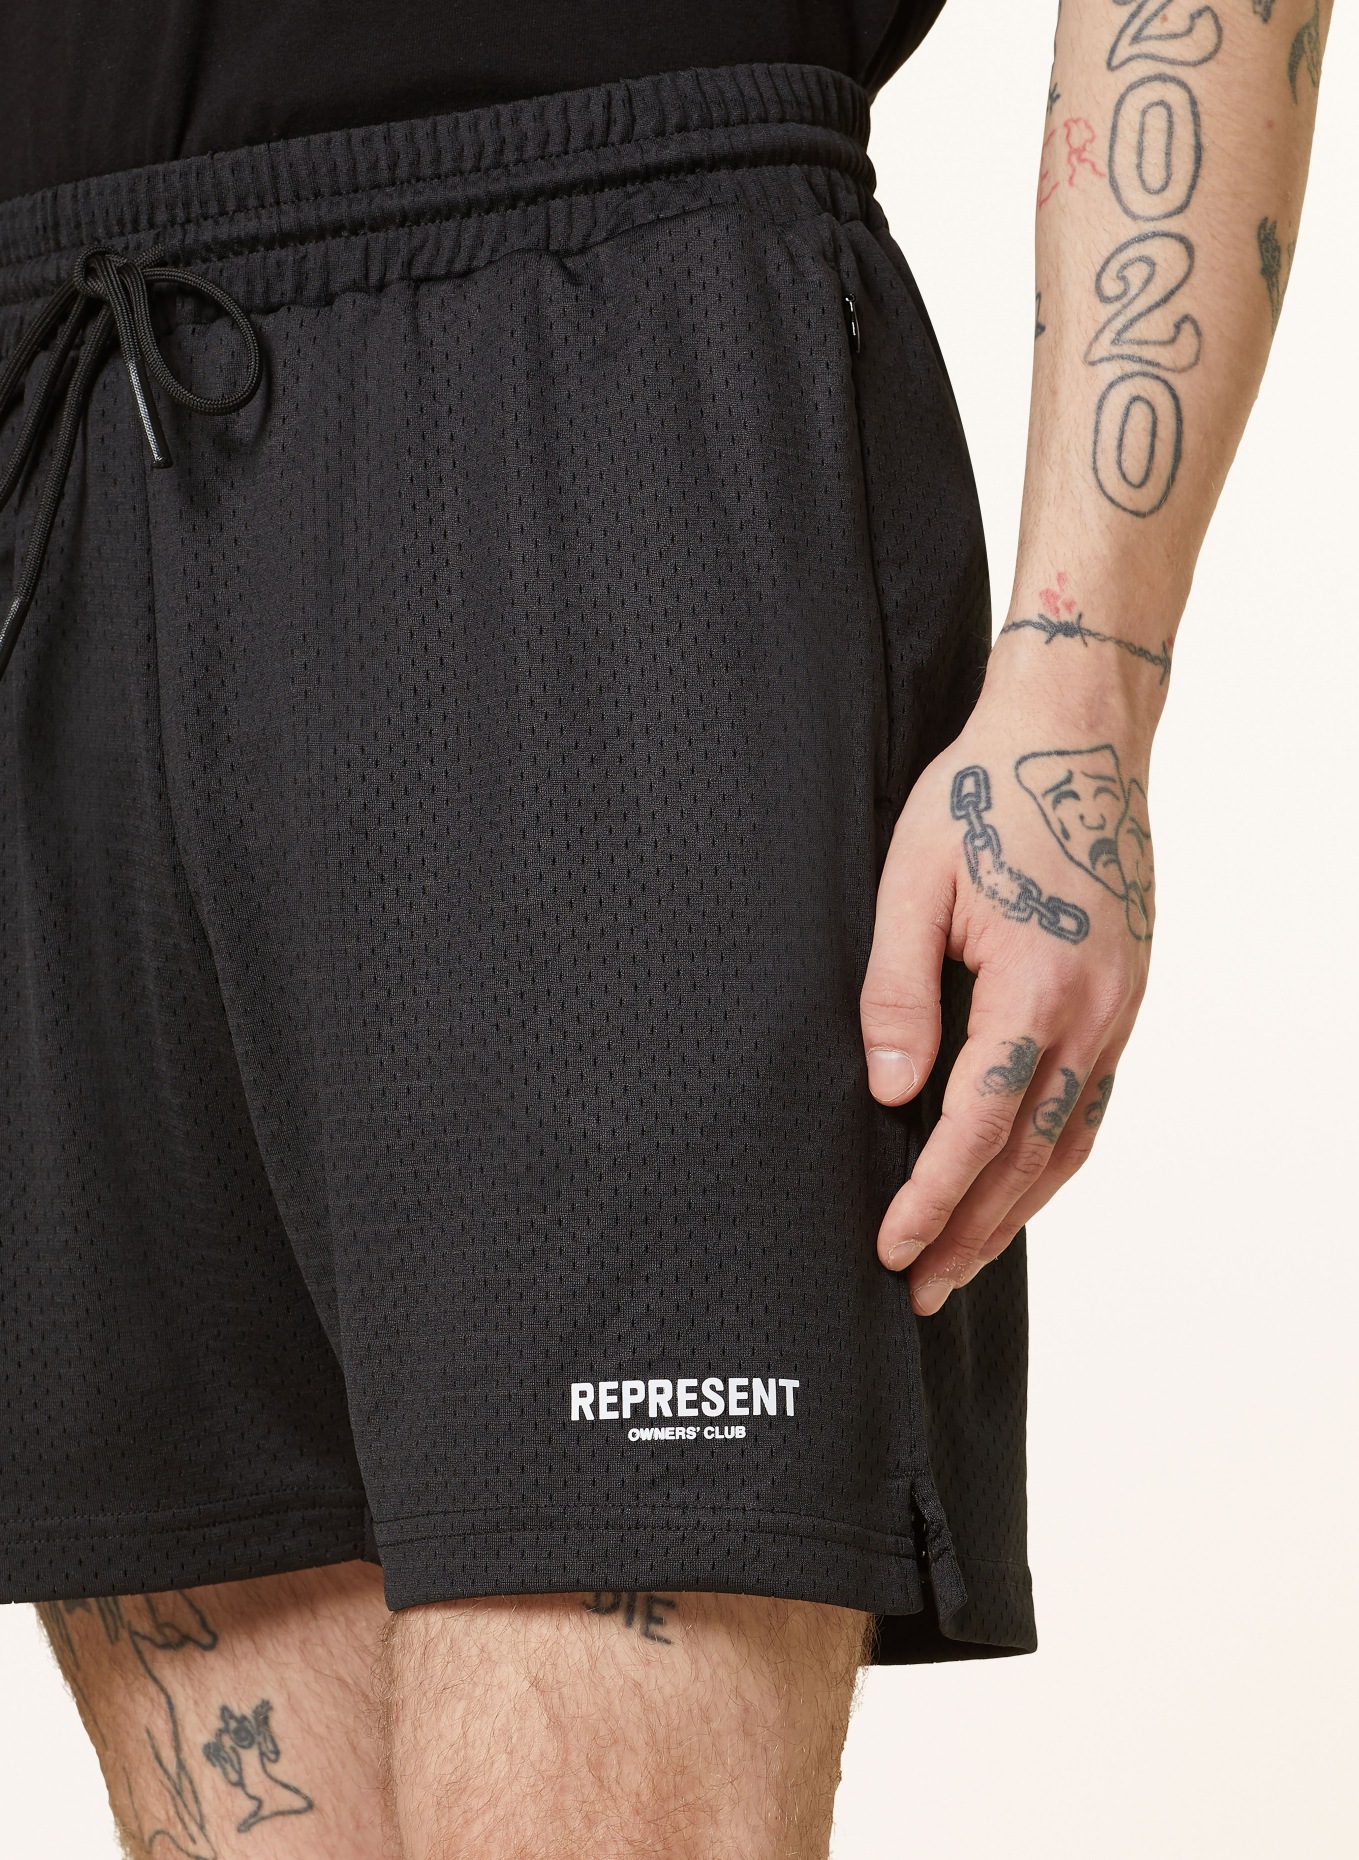 REPRESENT Shorts OWNERS CLUB, Color: BLACK (Image 5)